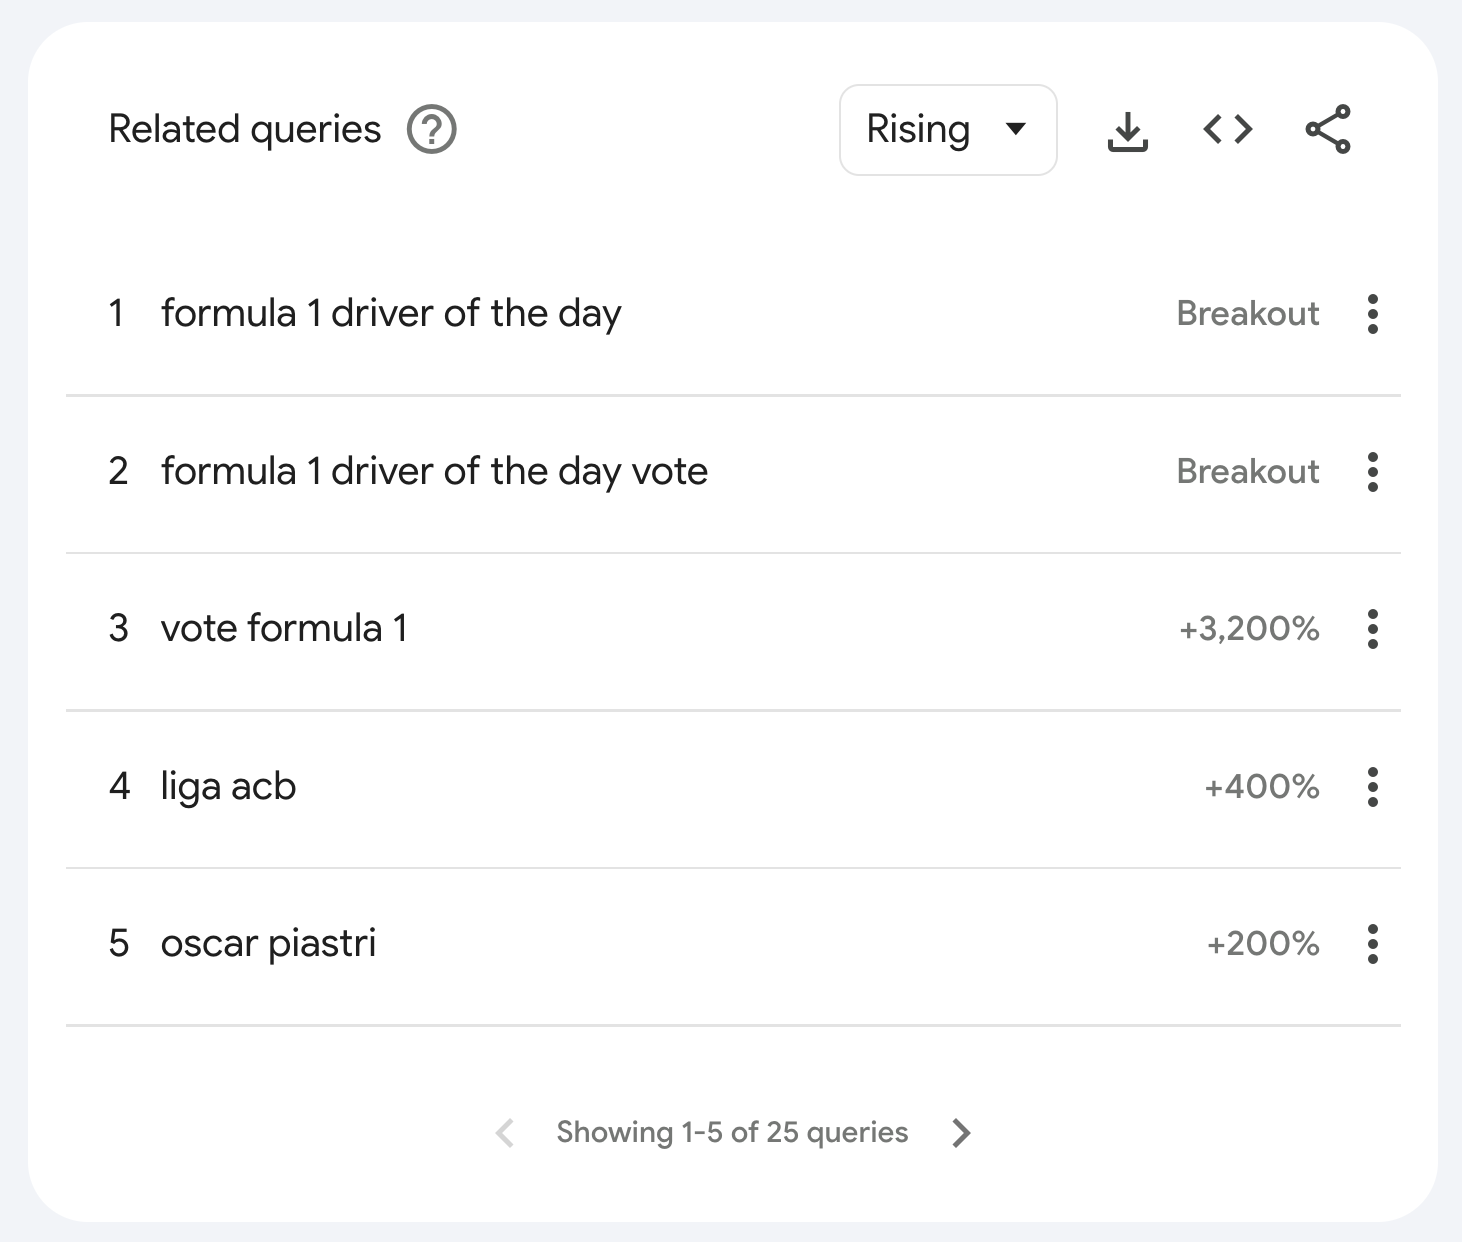 Figure 2. Top queries related to "formula 1." Screenshot from Google Trends.